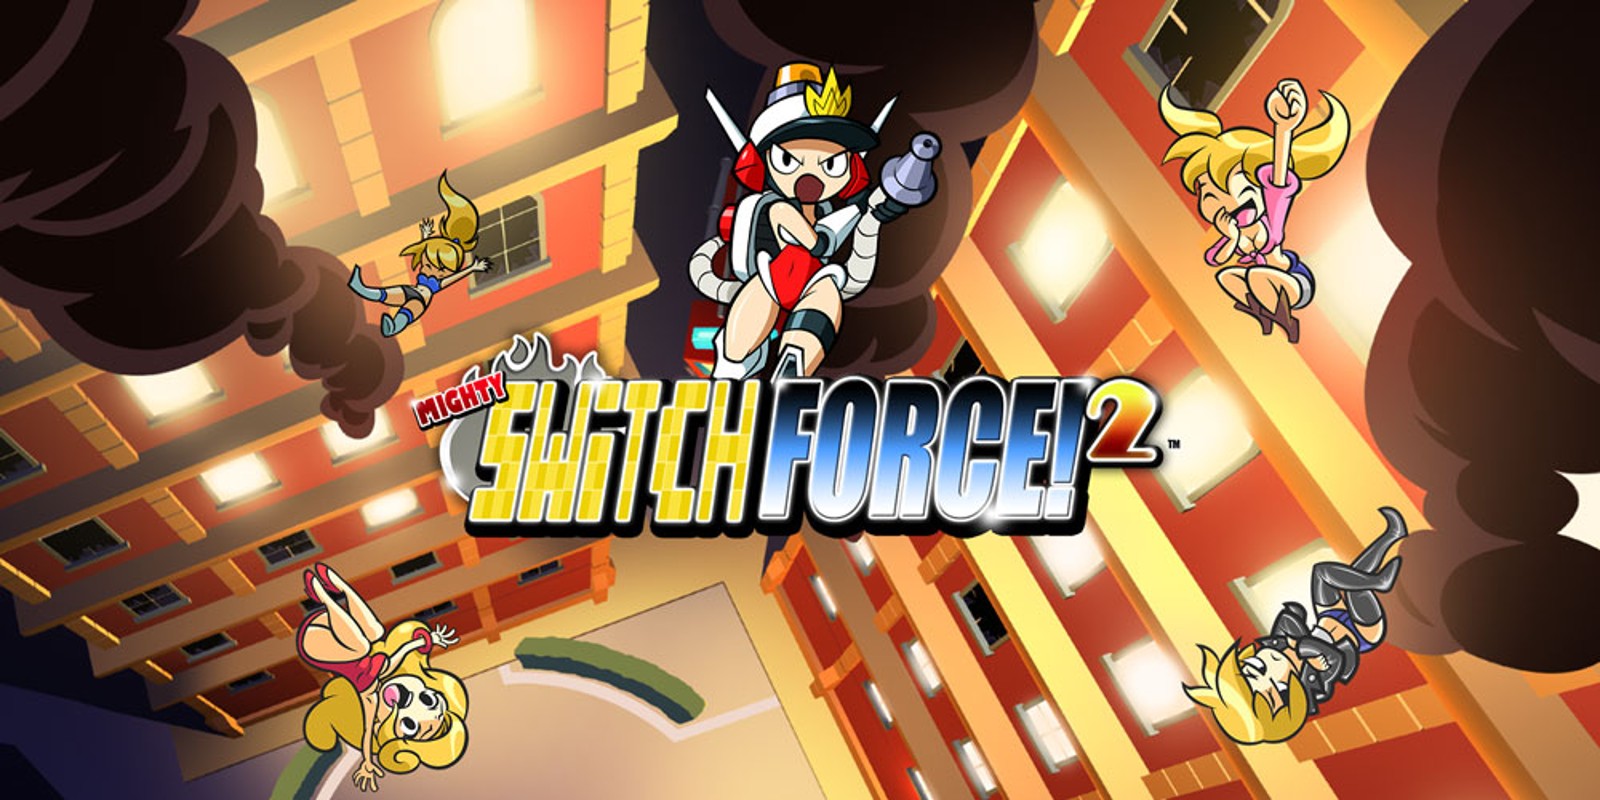 SI_3DSDS_MightySwitchForce2_image1600w.jpg